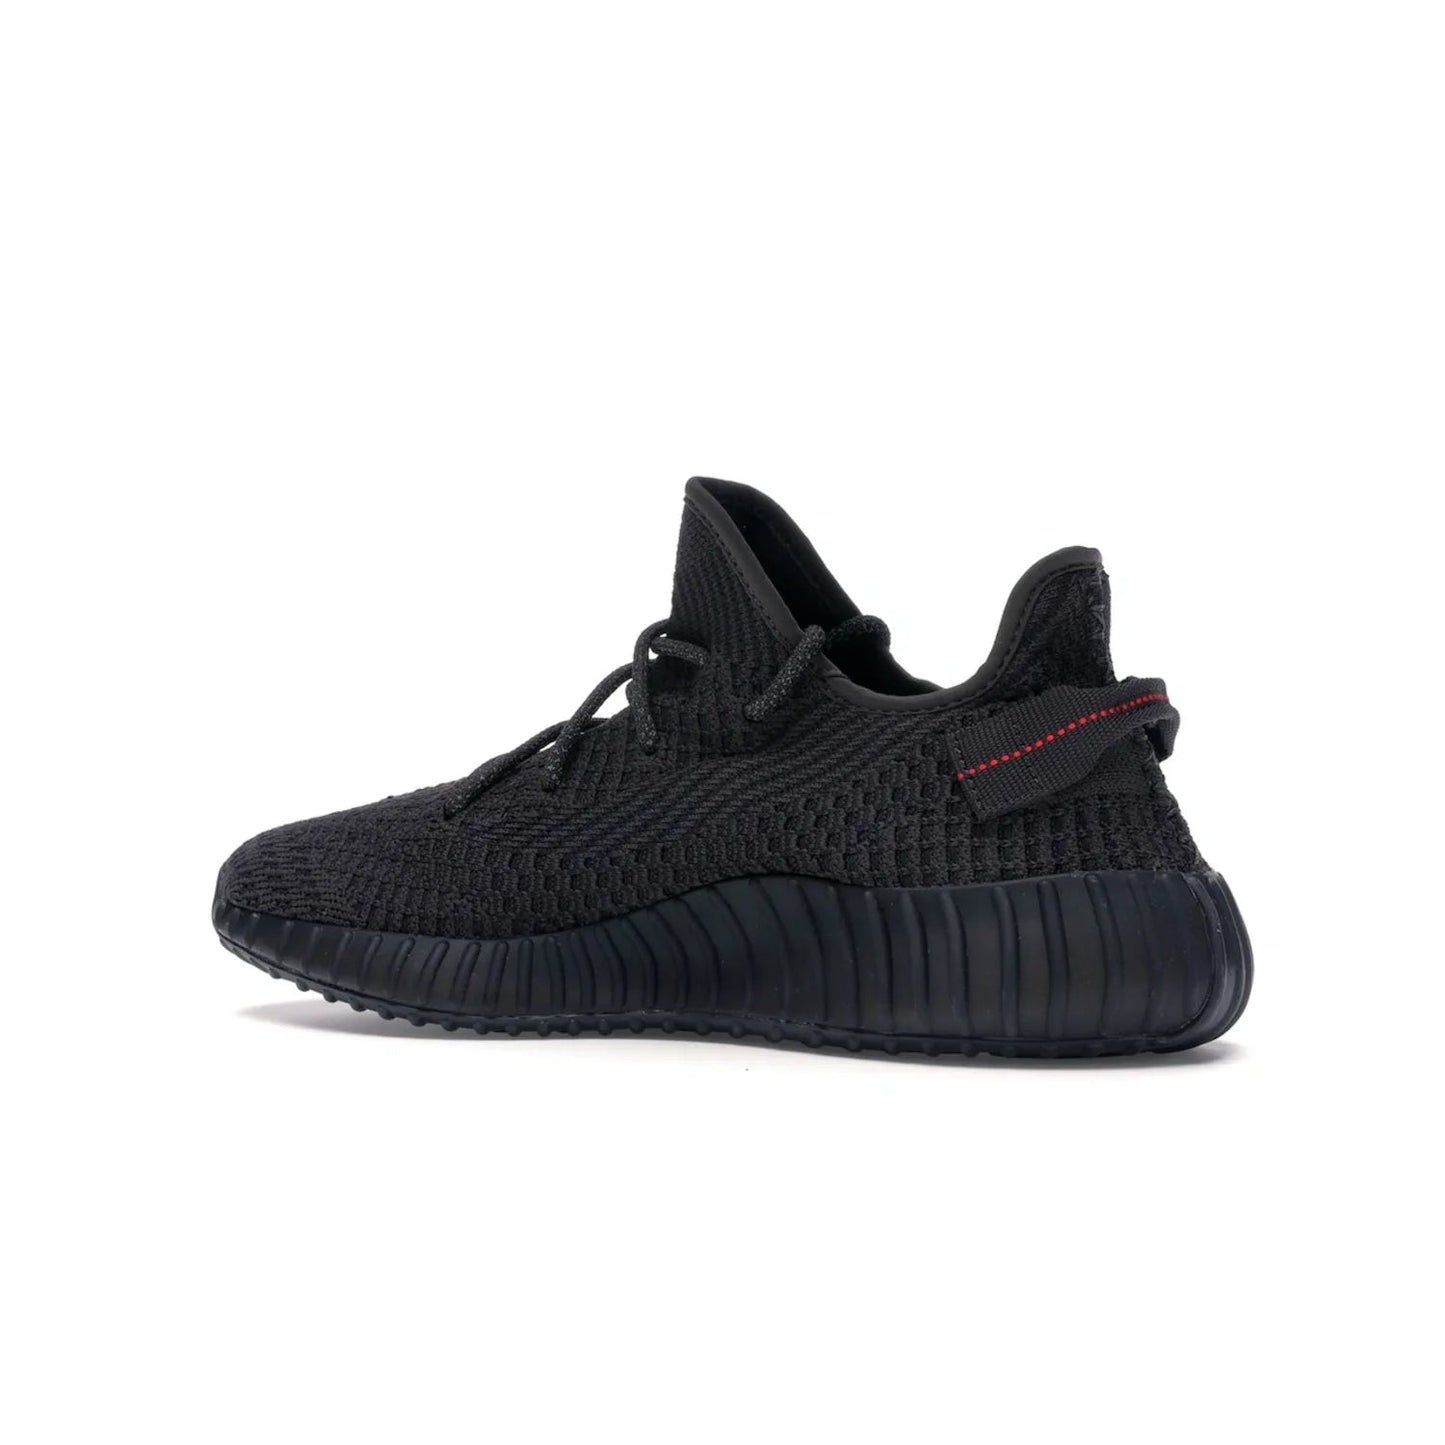 adidas Yeezy Boost 350 V2 Black (Non-Reflective) - Image 22 - Only at www.BallersClubKickz.com - A timeless, sleek silhouette crafted from quality materials. The adidas Yeezy Boost 350 V2 Black (Non-Reflective) brings style and sophistication. Get yours now!